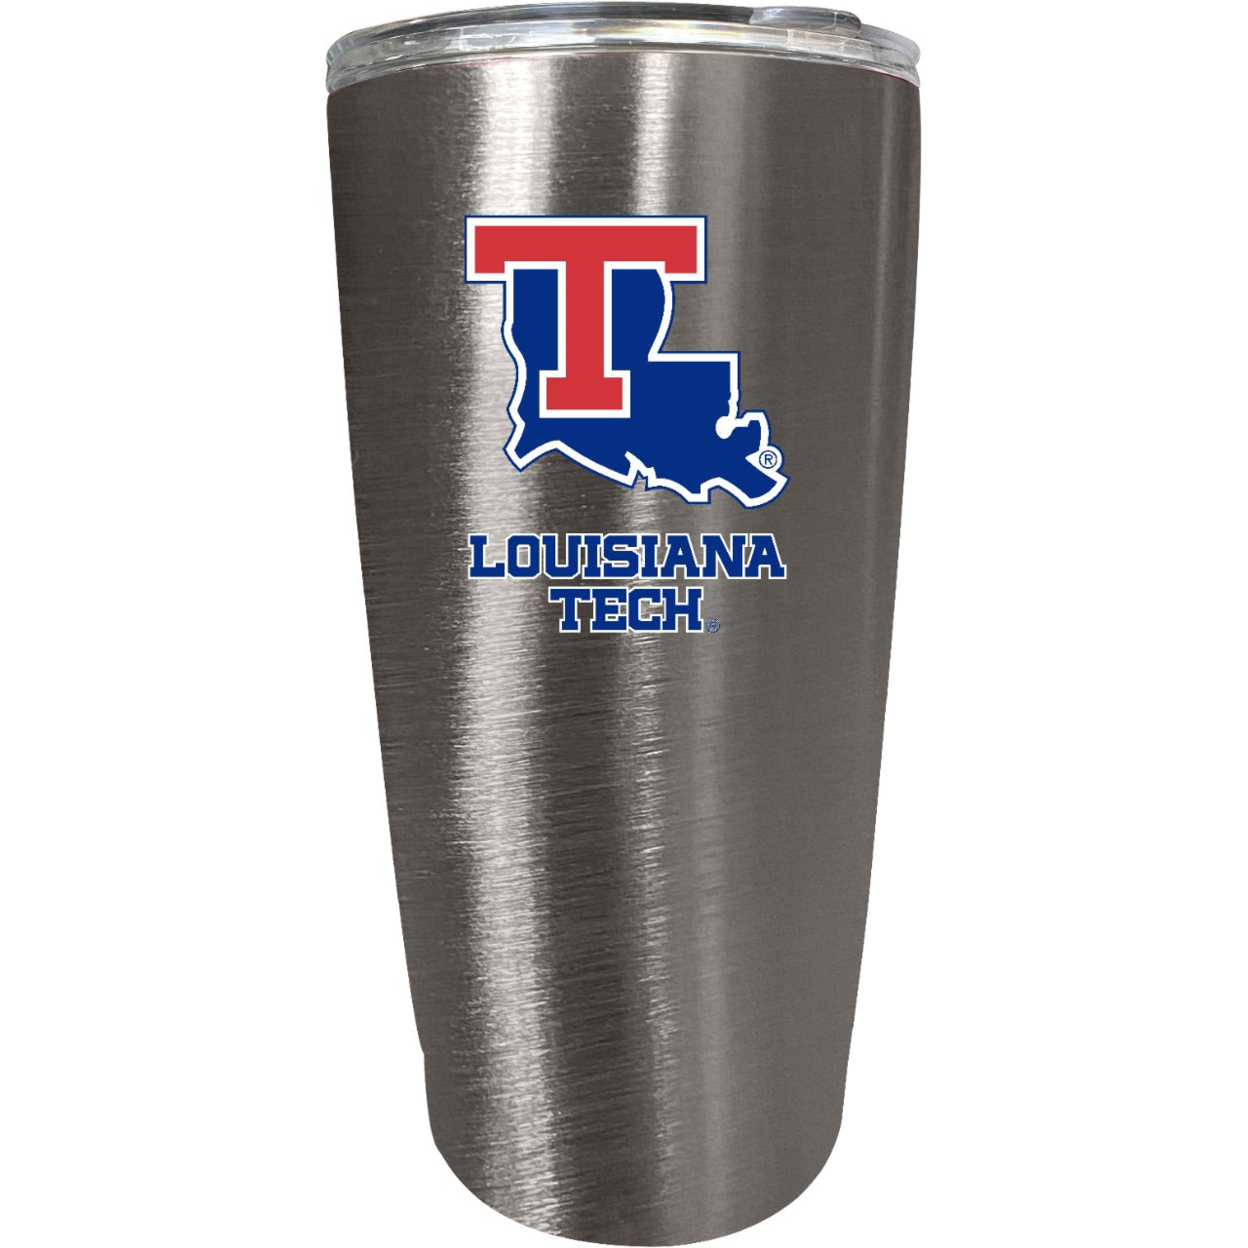 Louisiana Tech Bulldogs 16 Oz Insulated Stainless Steel Tumbler Colorless